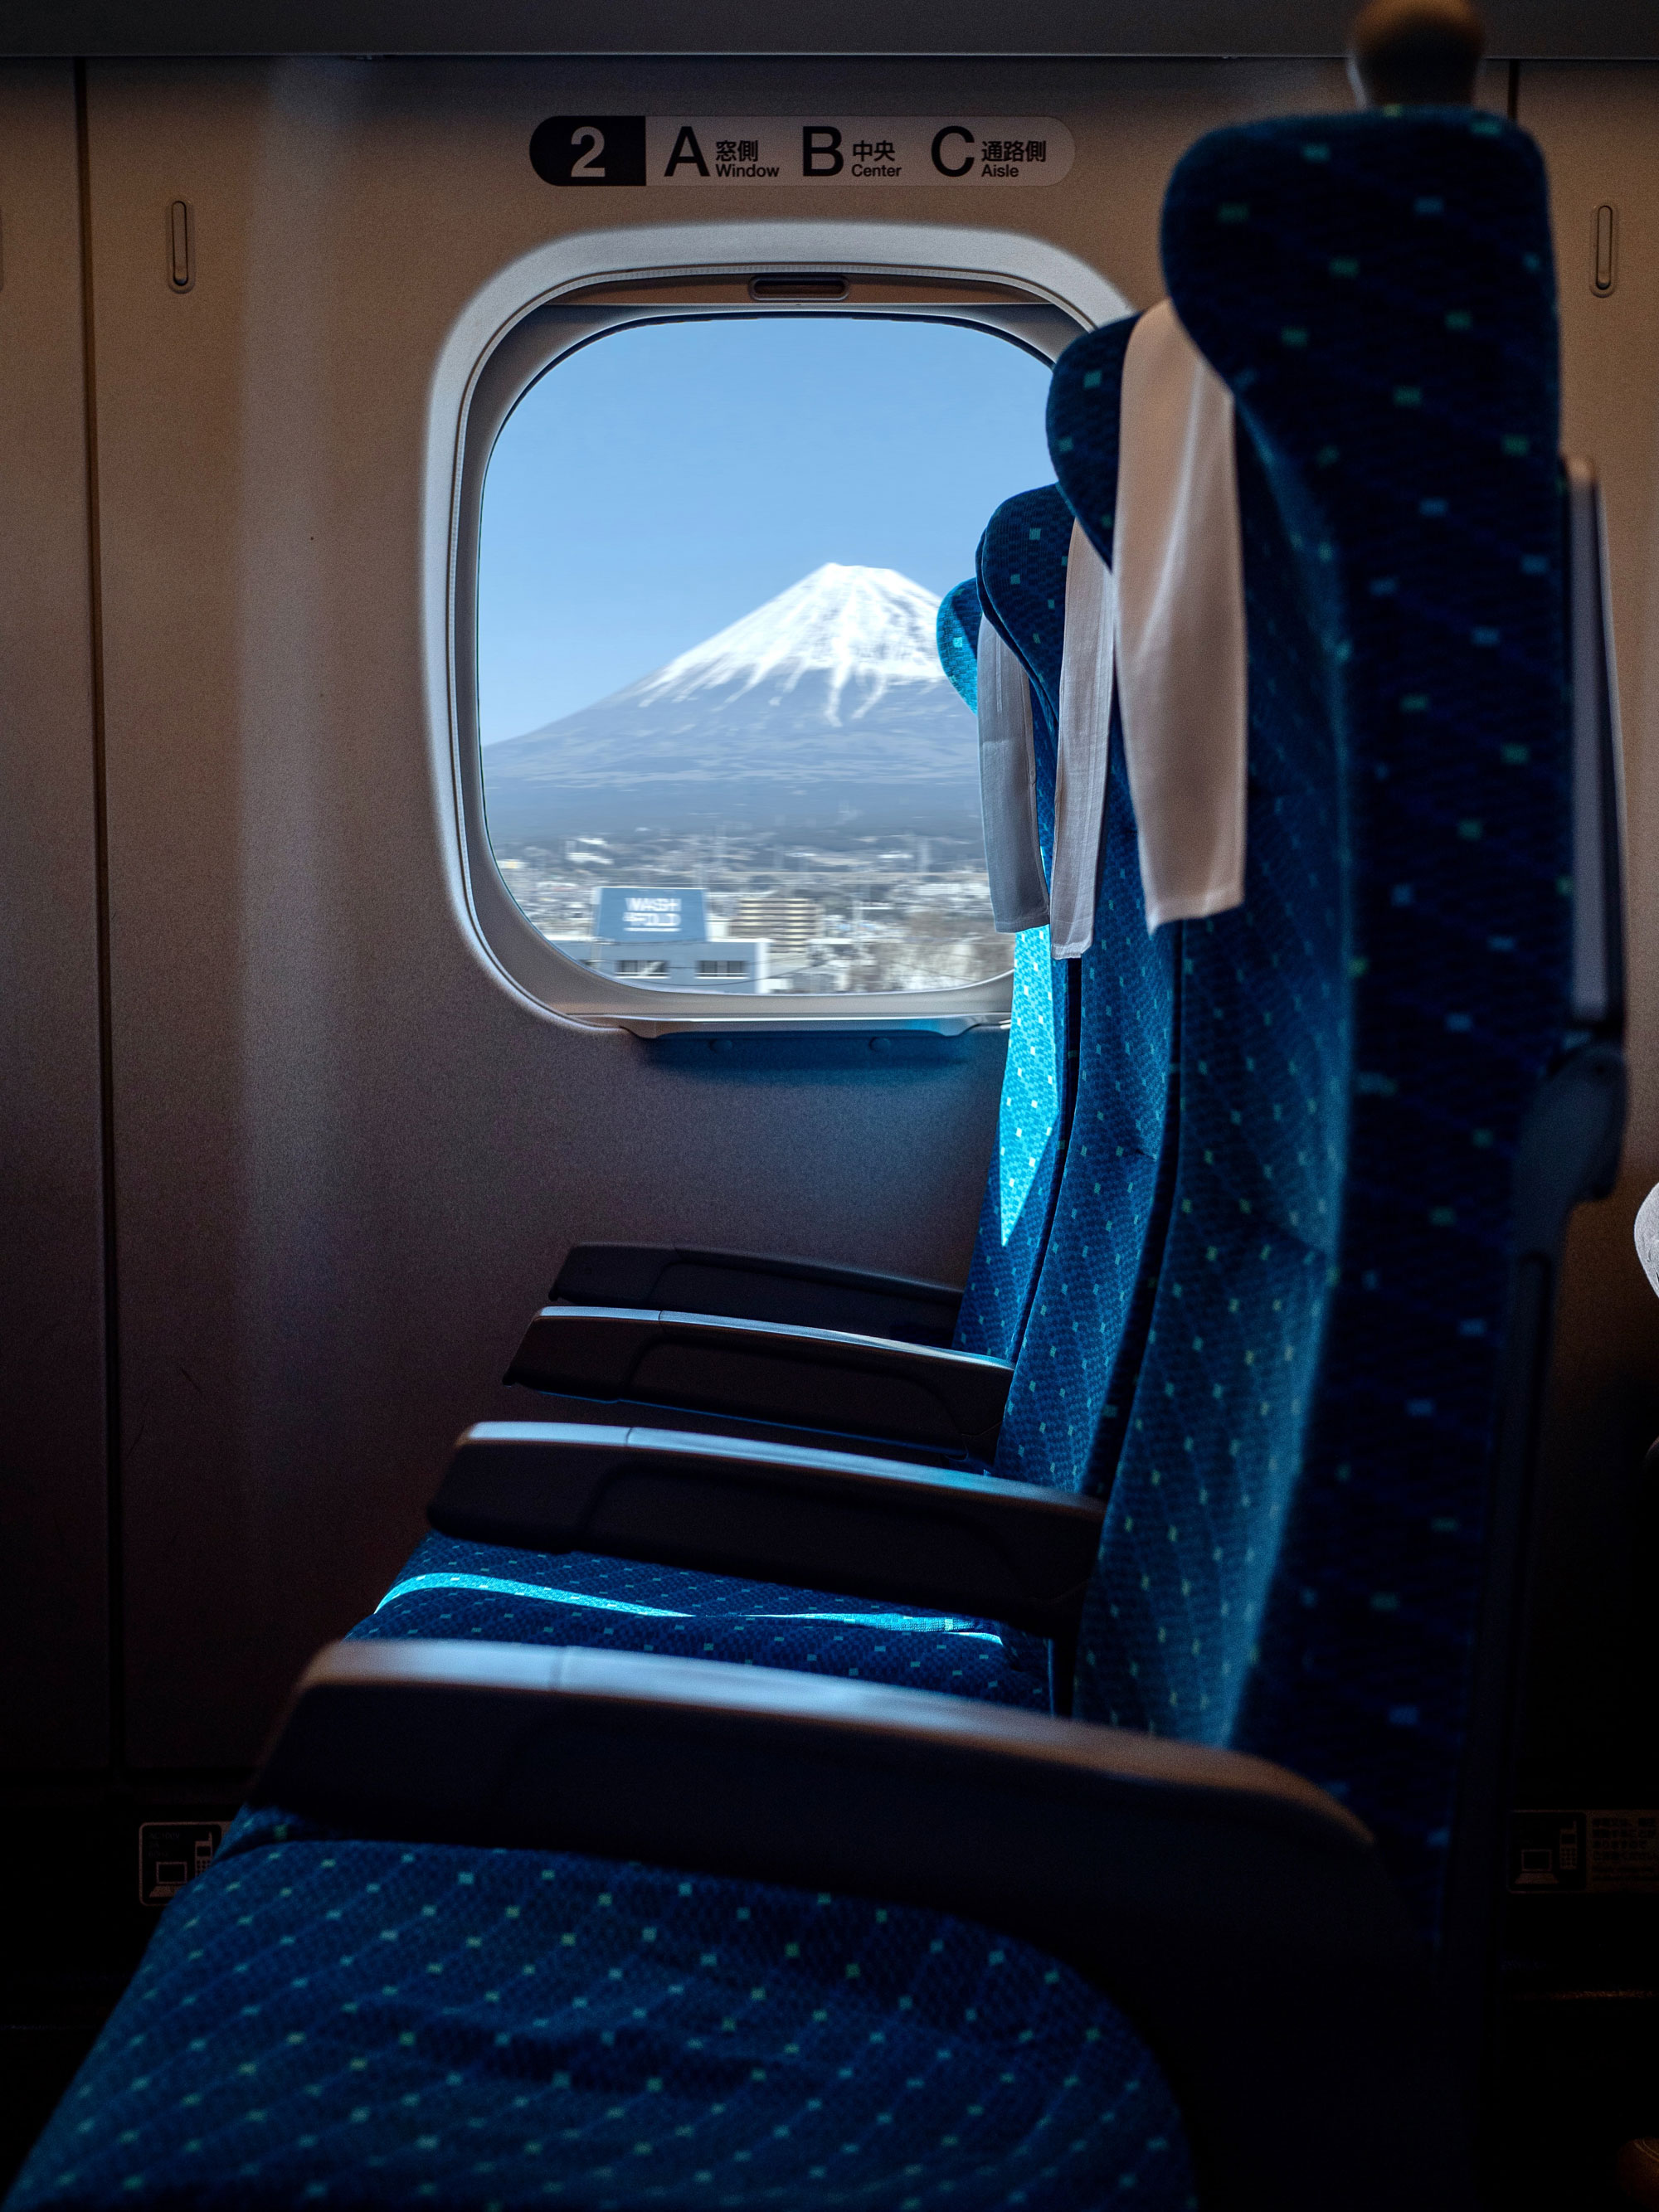 Mt. Fuji as seen from a bullet train